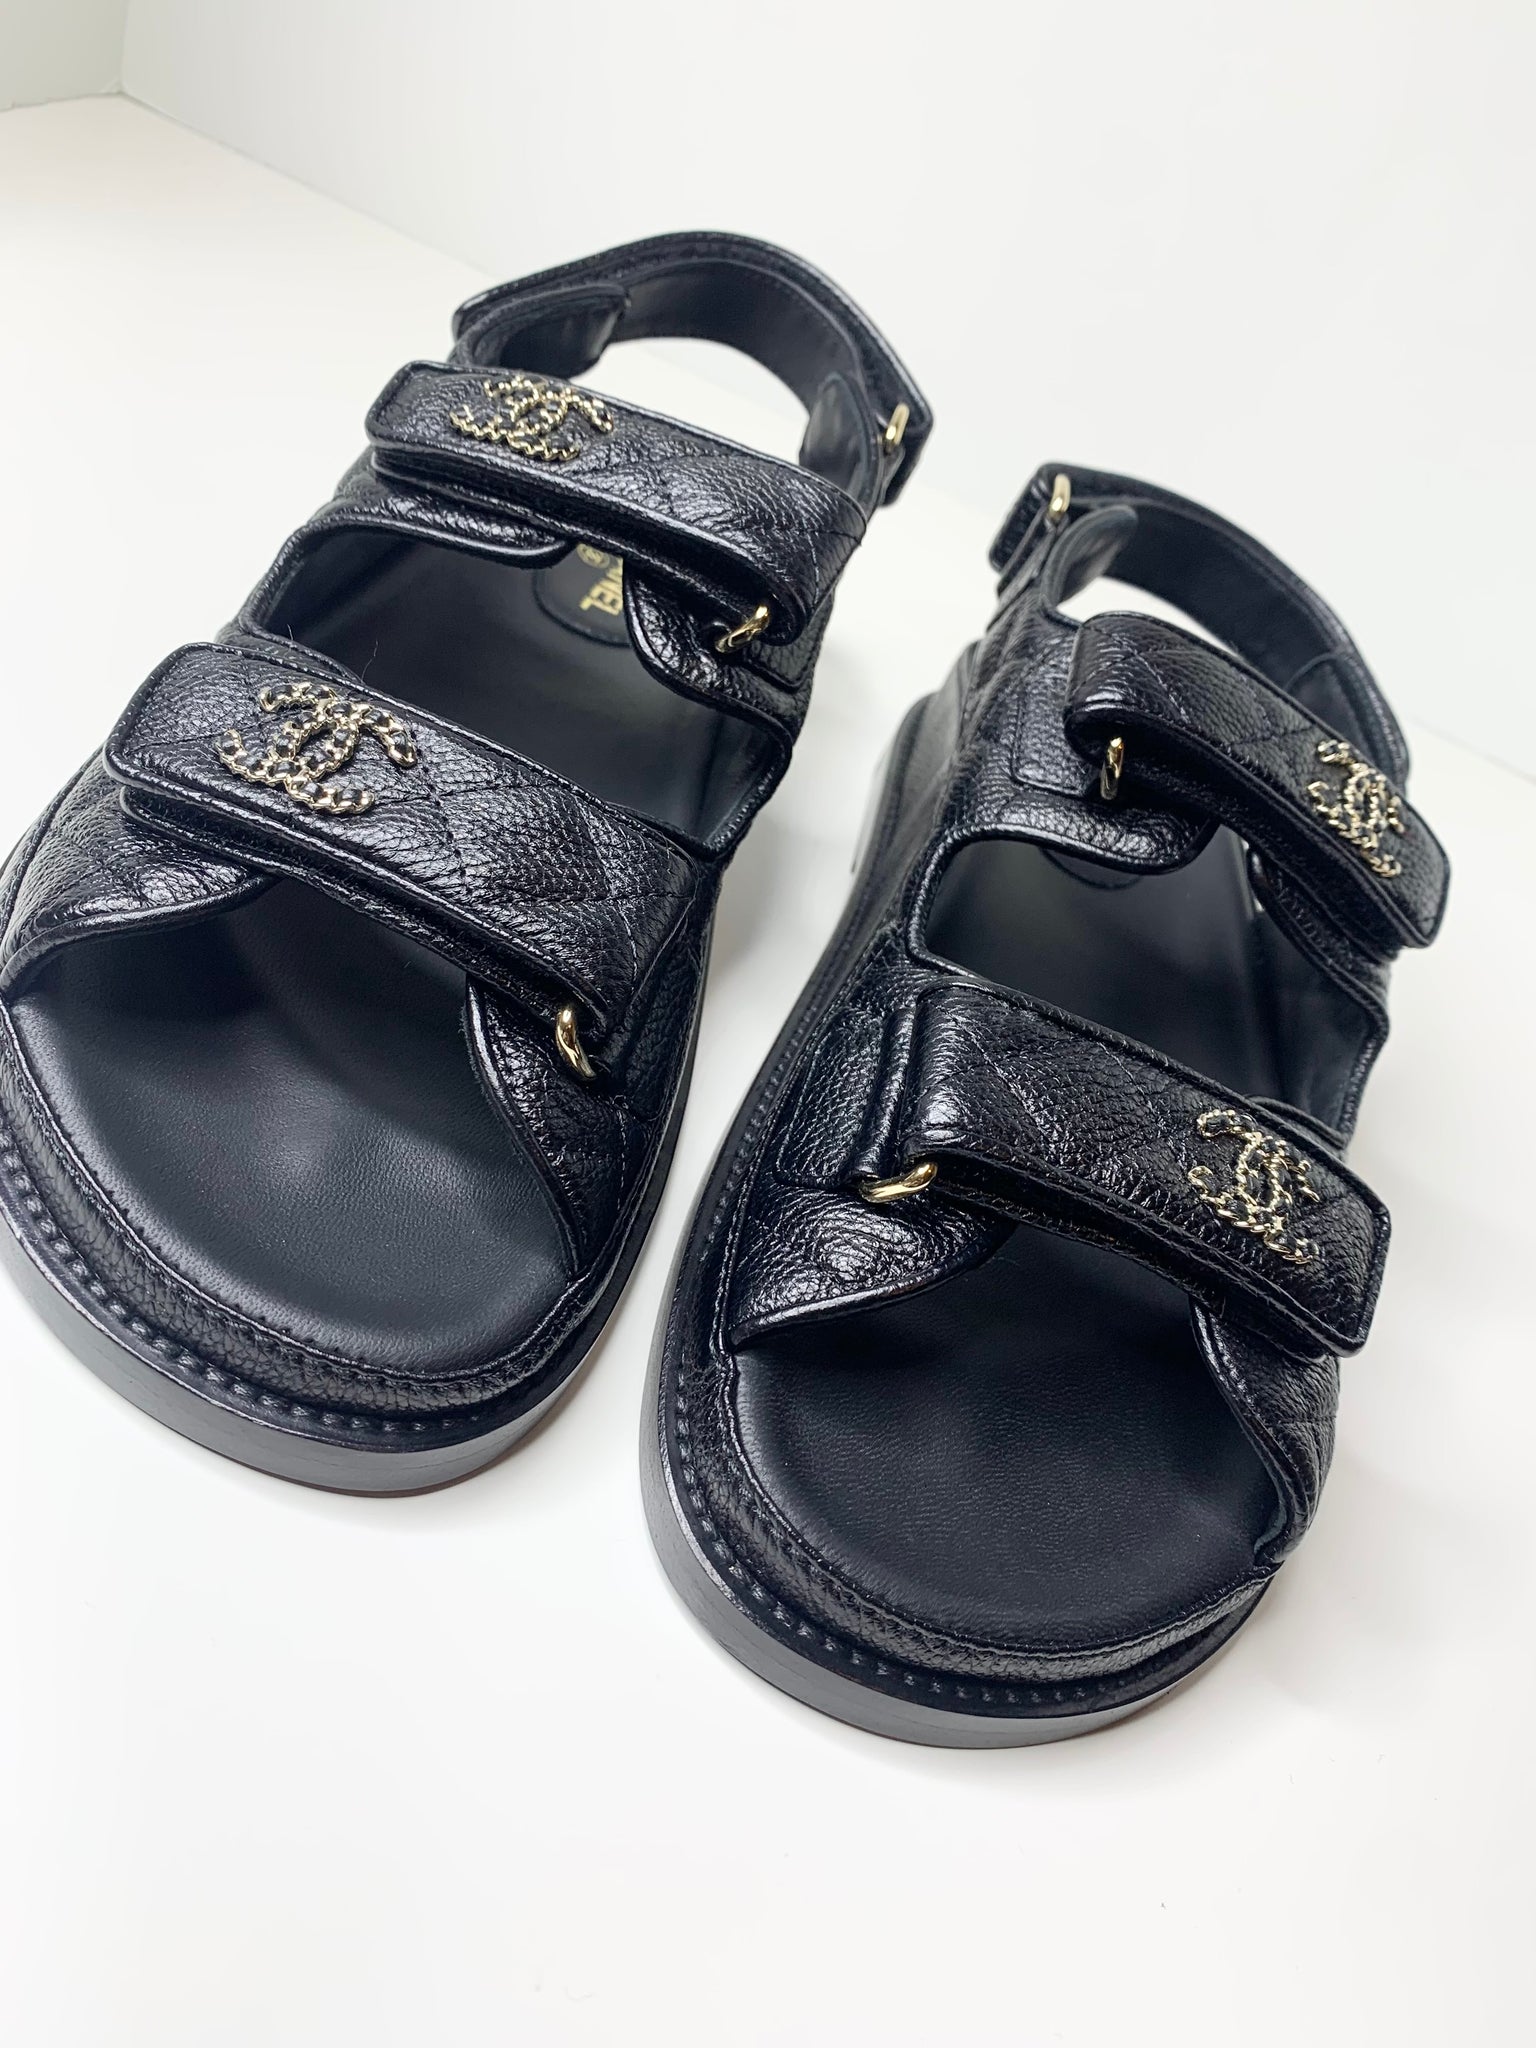 CHANEL, Shoes, Chanel Denim Gold Quilted Cc Logo Daddy Sandal